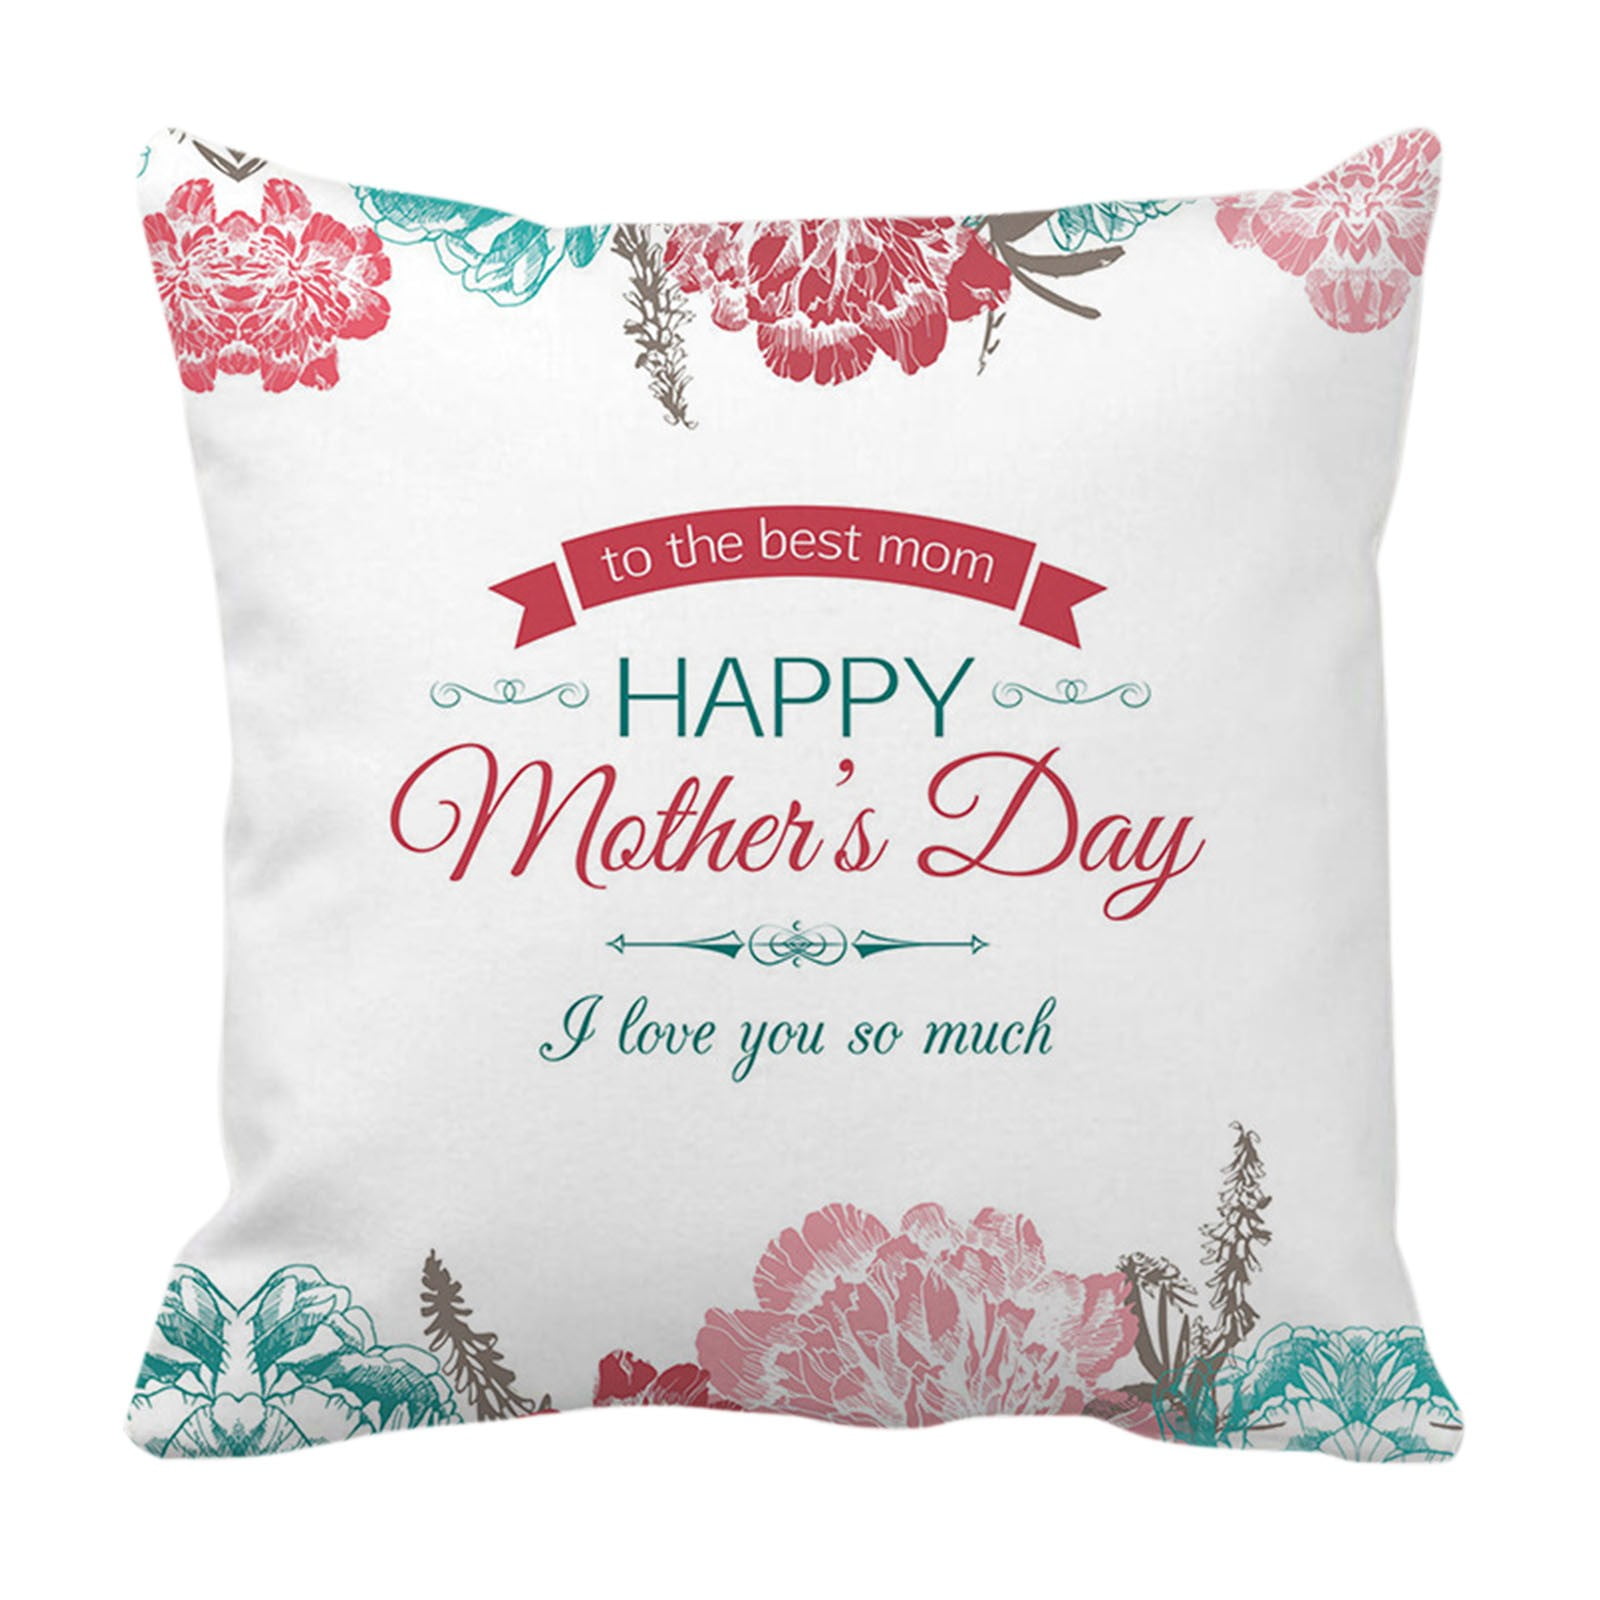 Book Gift This mom Loves Reading and her Kinds Books Mother Throw Pillow Multicolor 16x16 